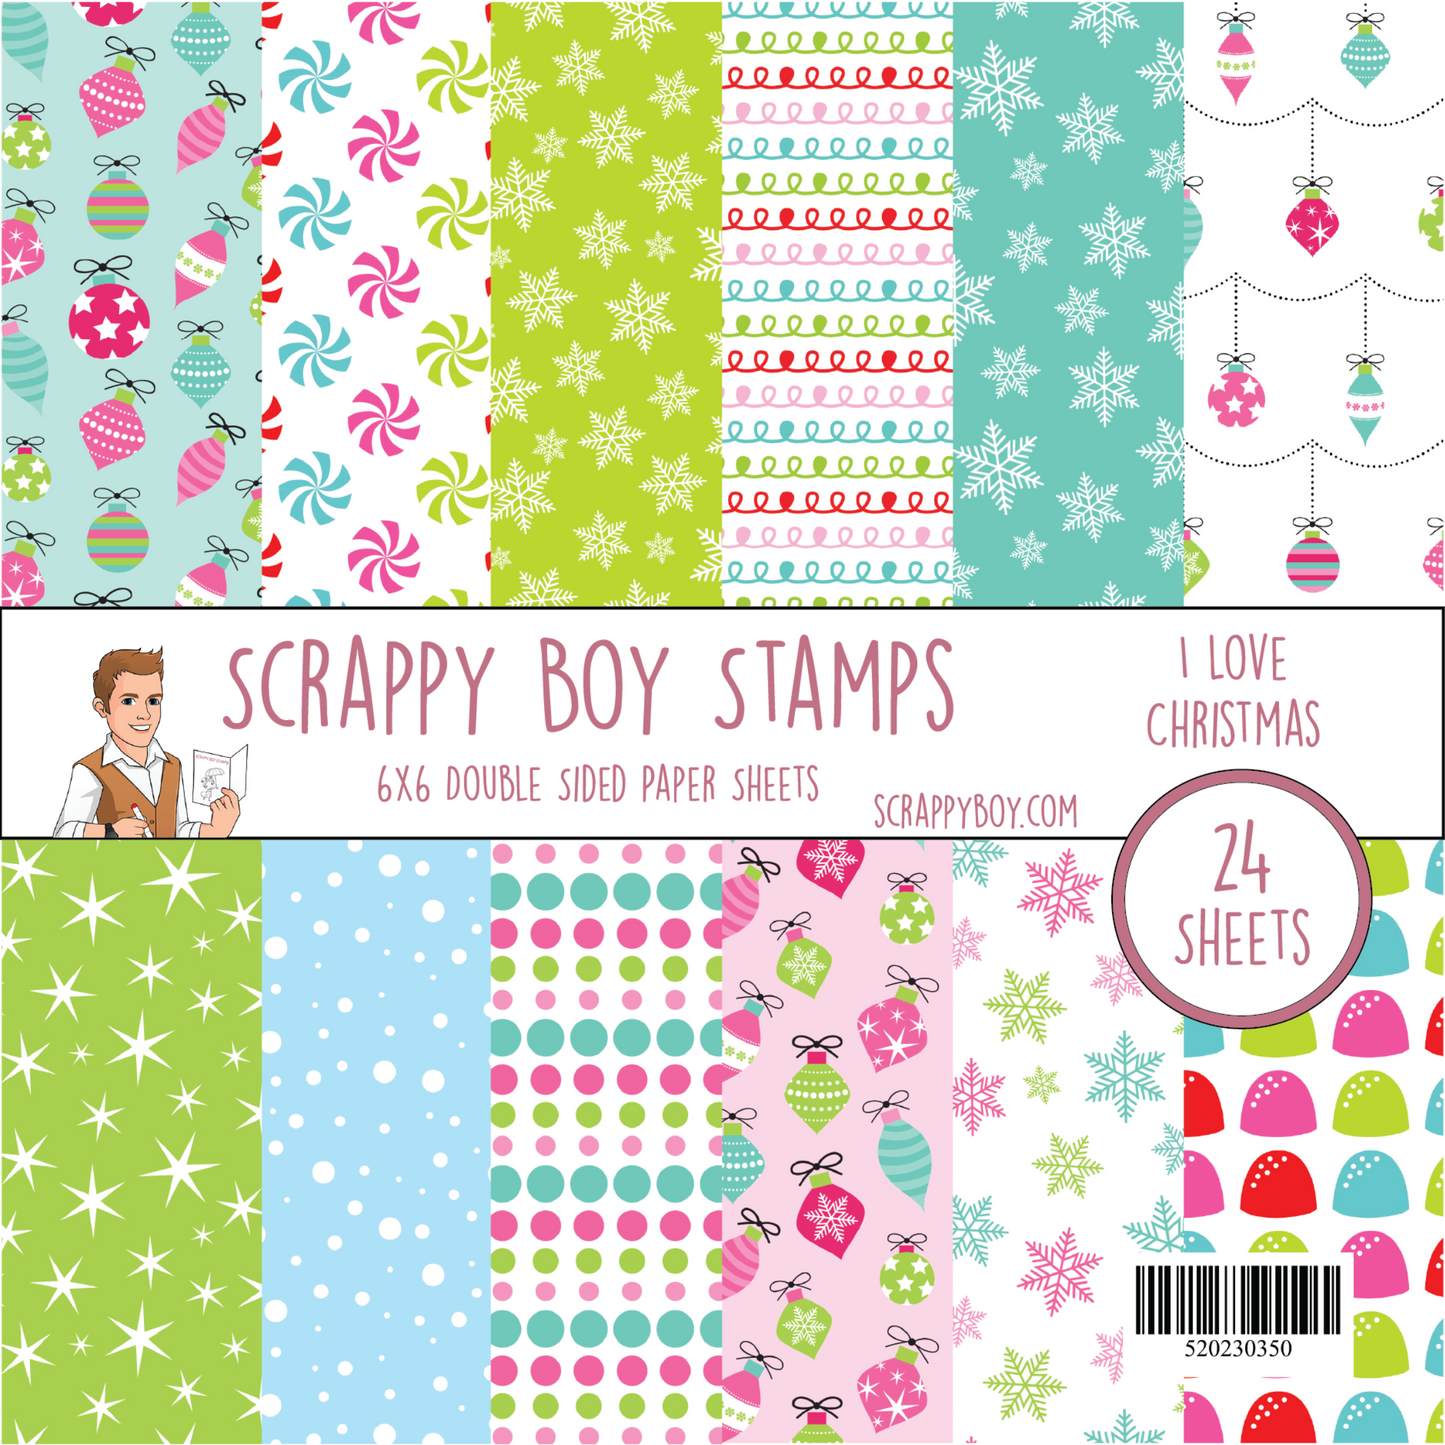 
                  
                    I Want It All Bundle - Cute Girls Christmas Toys Release Scrappy Boy Stamps
                  
                